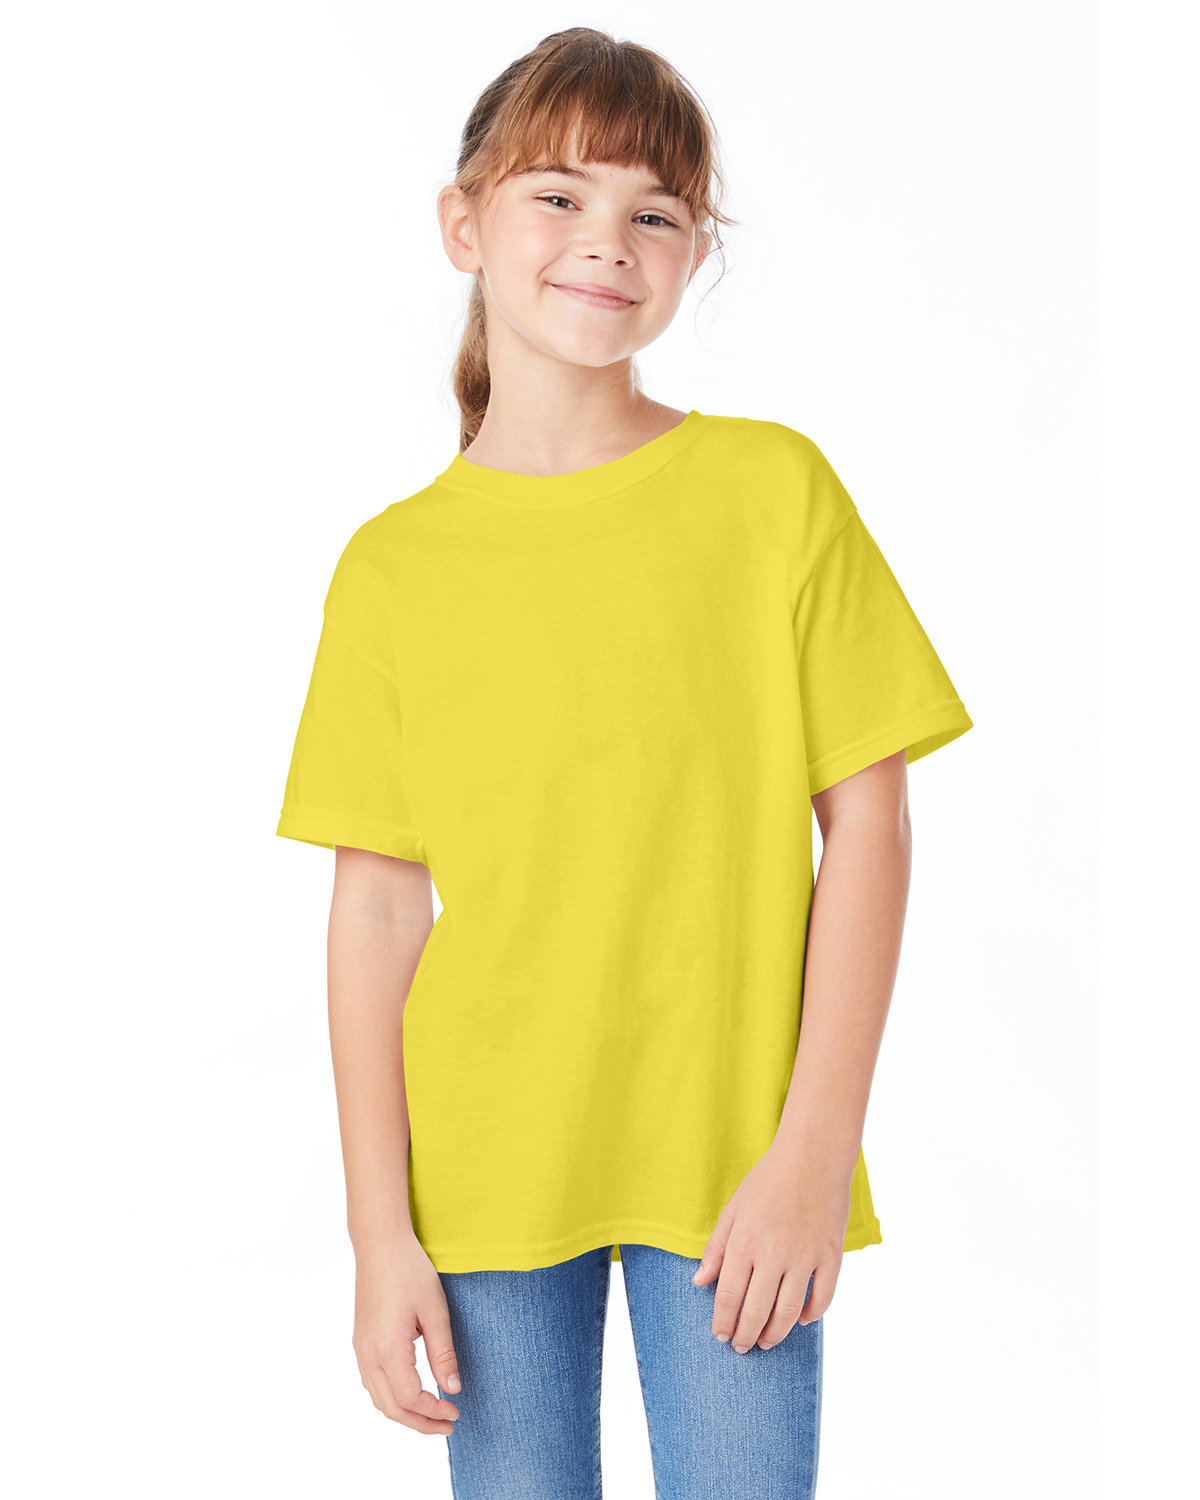 Hanes Youth Essential-T T-Shirt YELLOW 